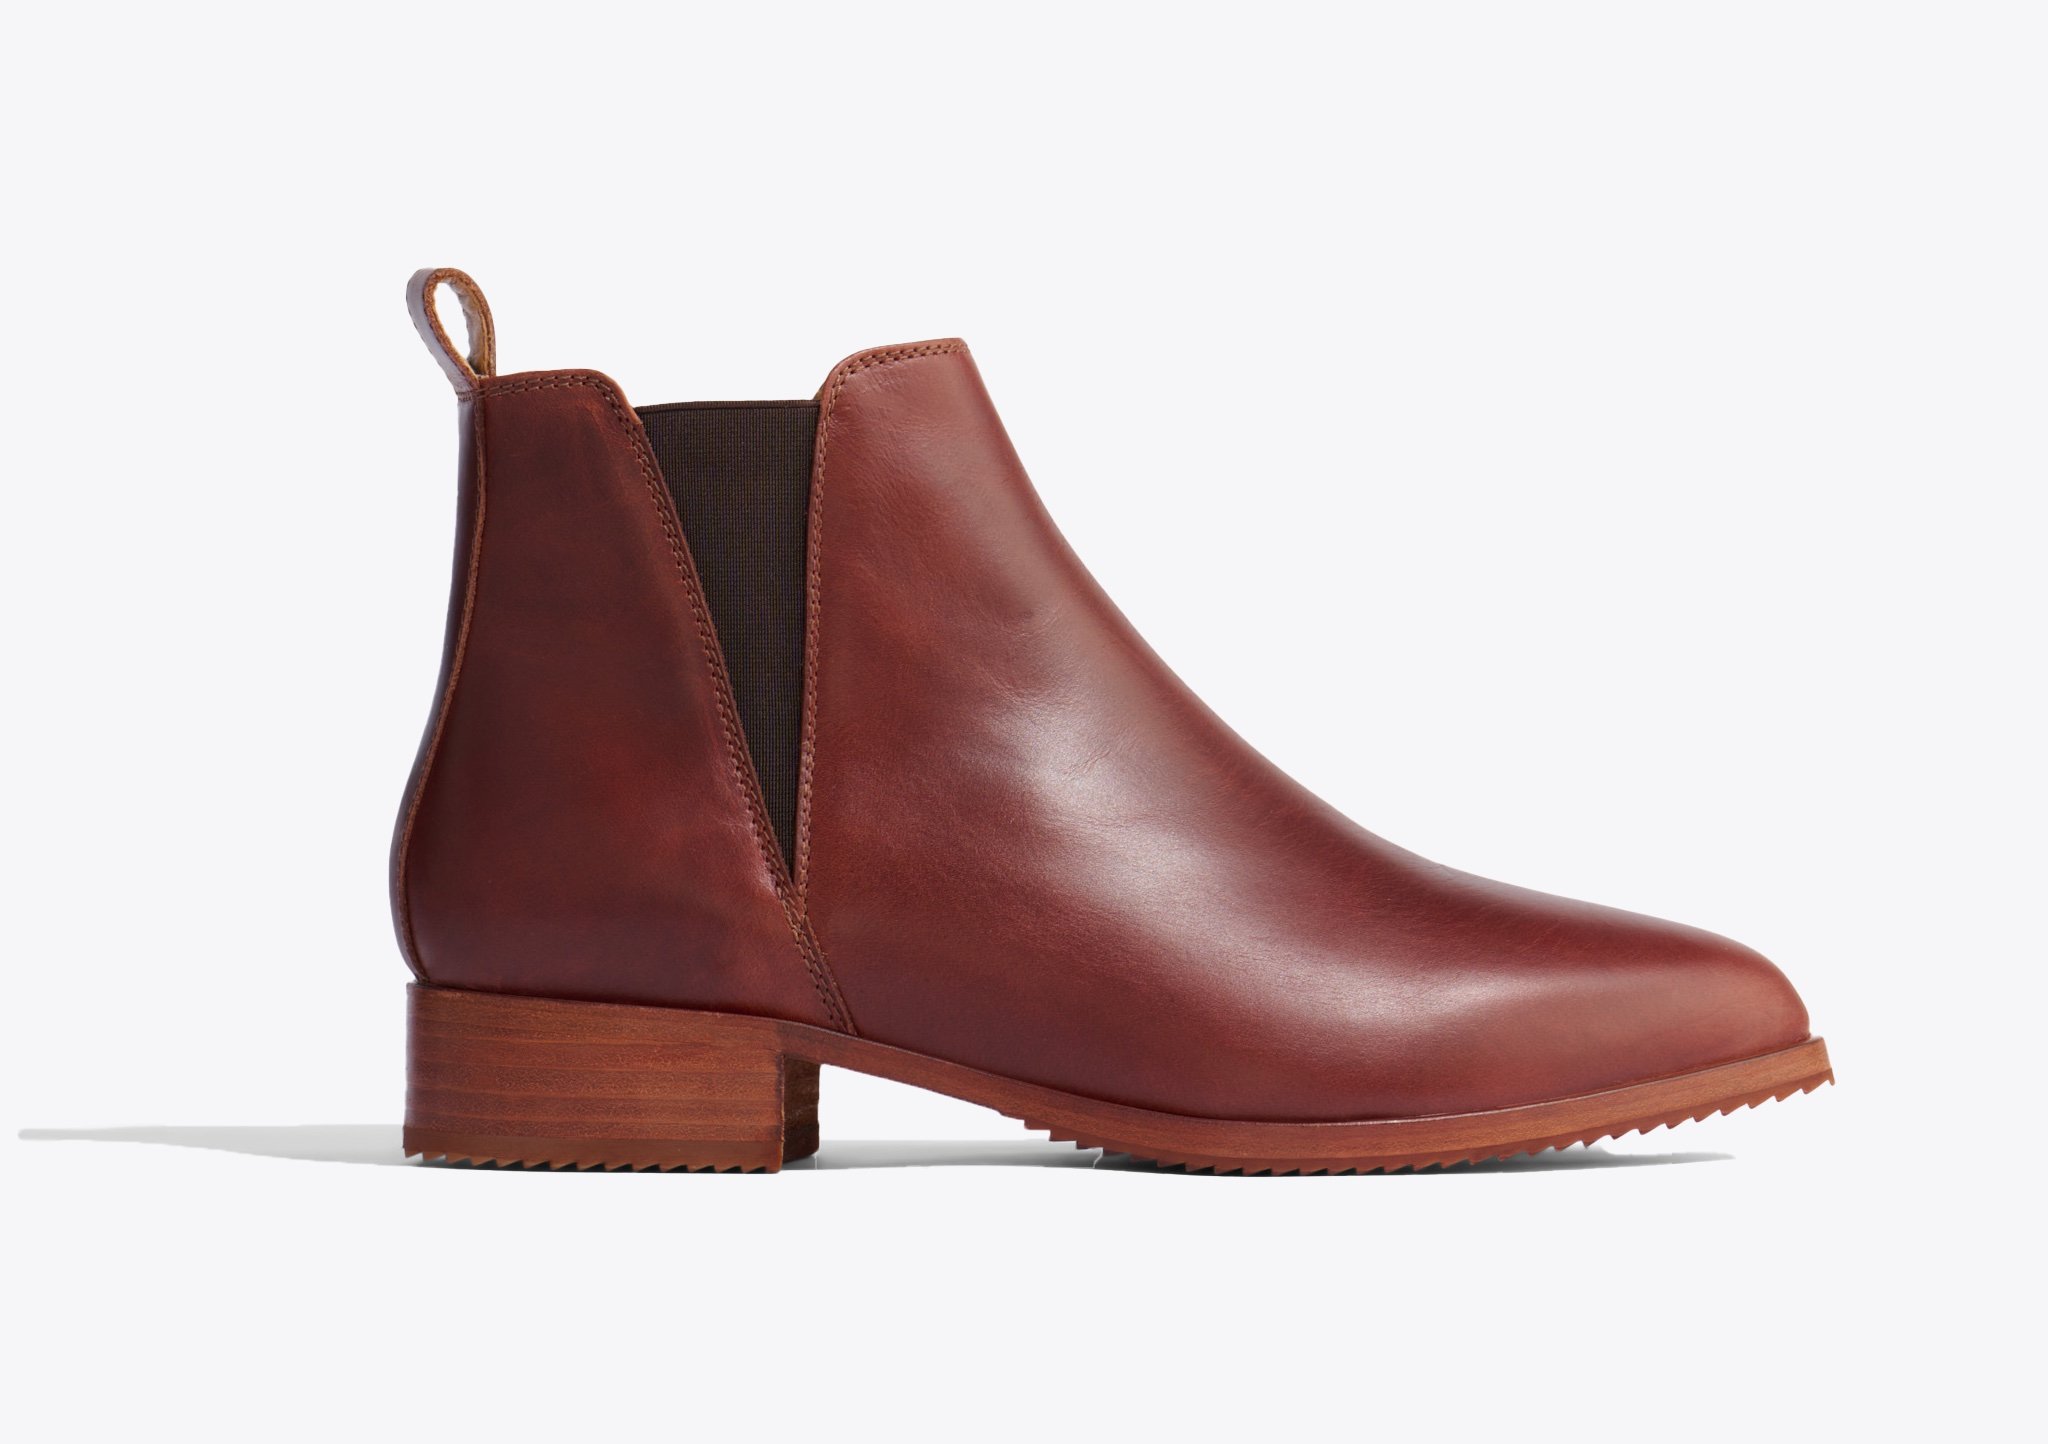 Nisolo Eva Everyday Chelsea Boot Auburn - Every Nisolo product is built on the foundation of comfort, function, and design. 